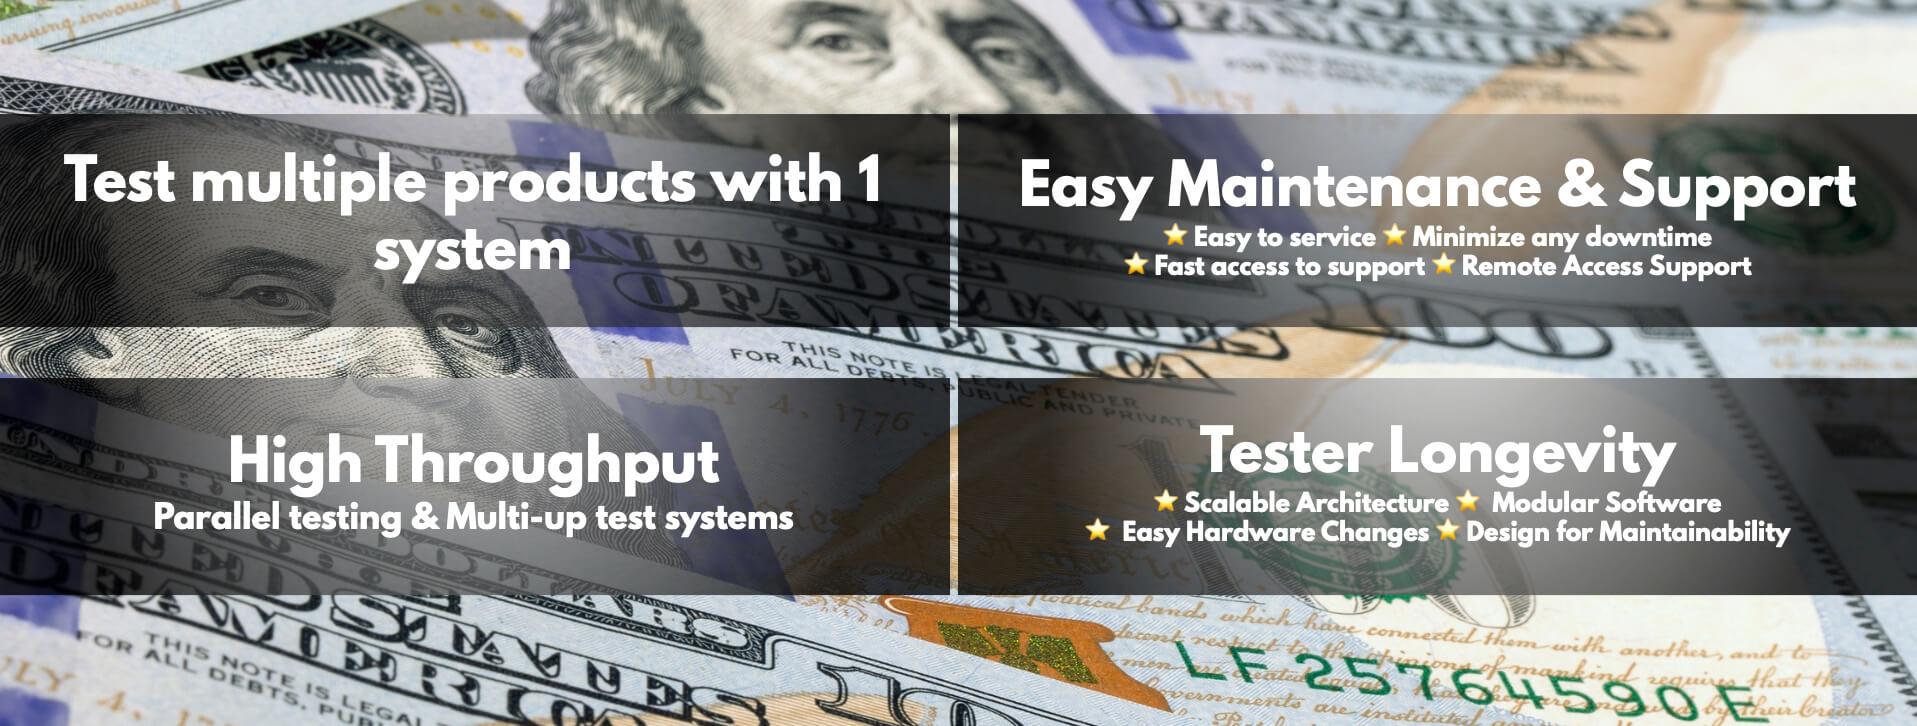 Delivering Outstanding Testers That Fit Your Budget